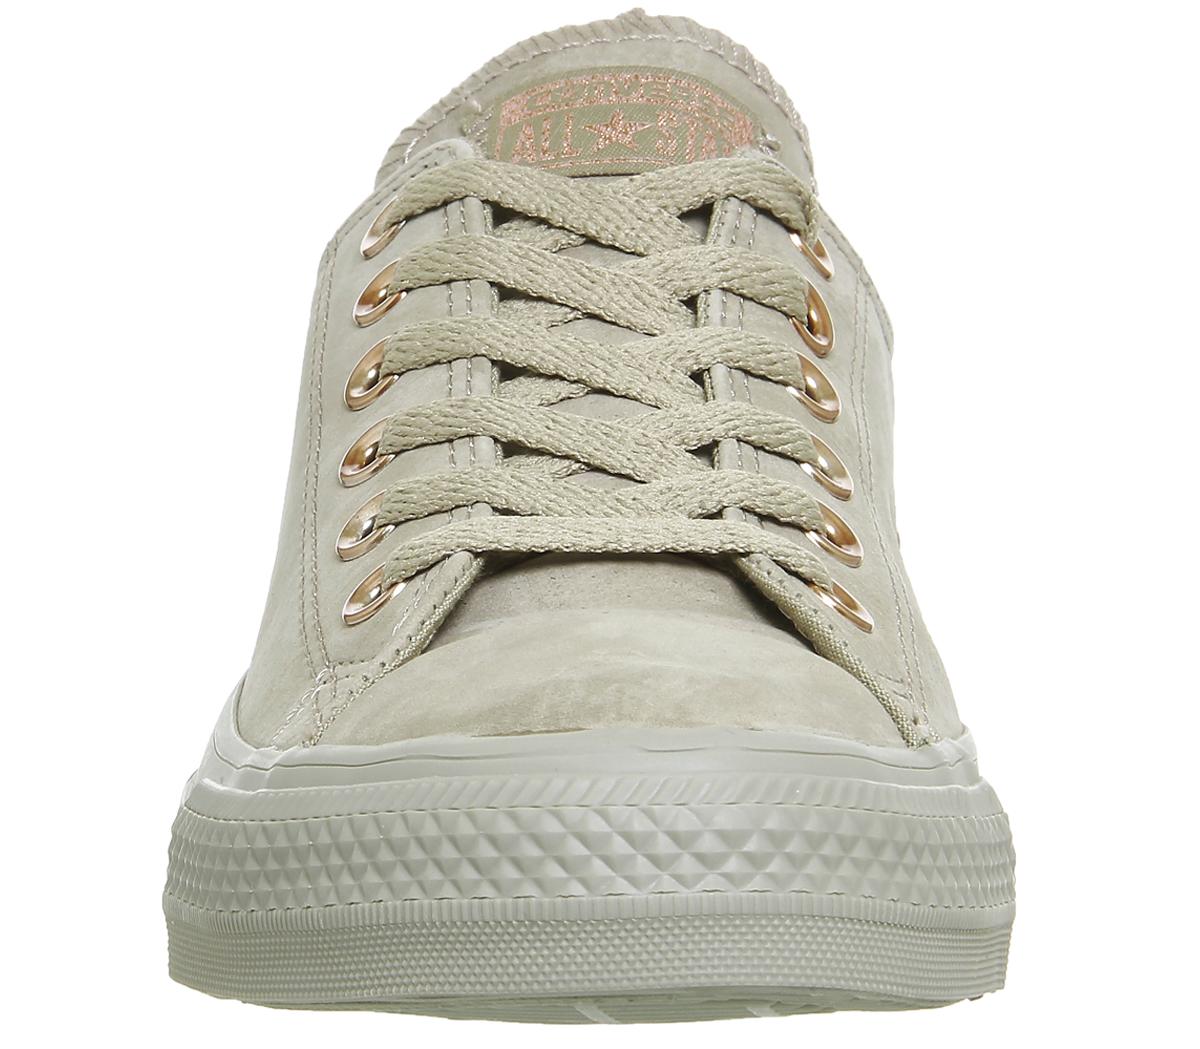 Converse All Star Low Leather Khaki 